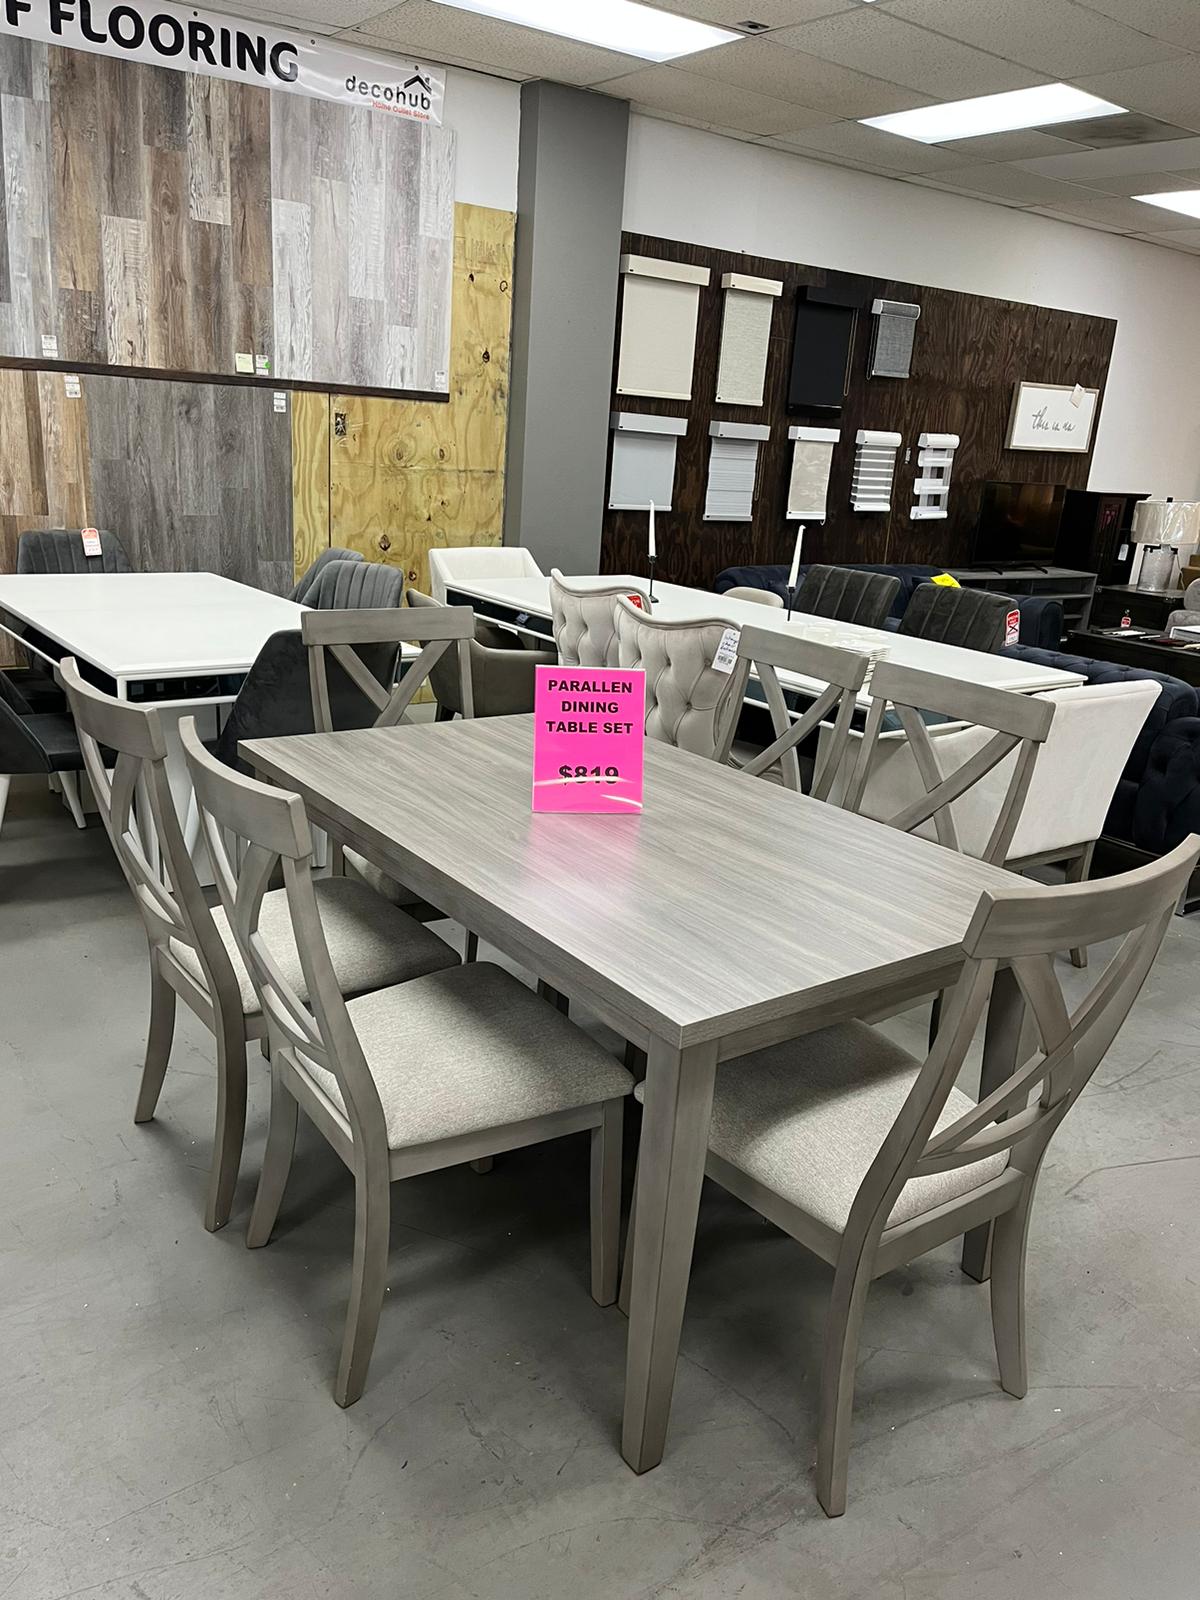 Parellen Dining Table and Chairs Set